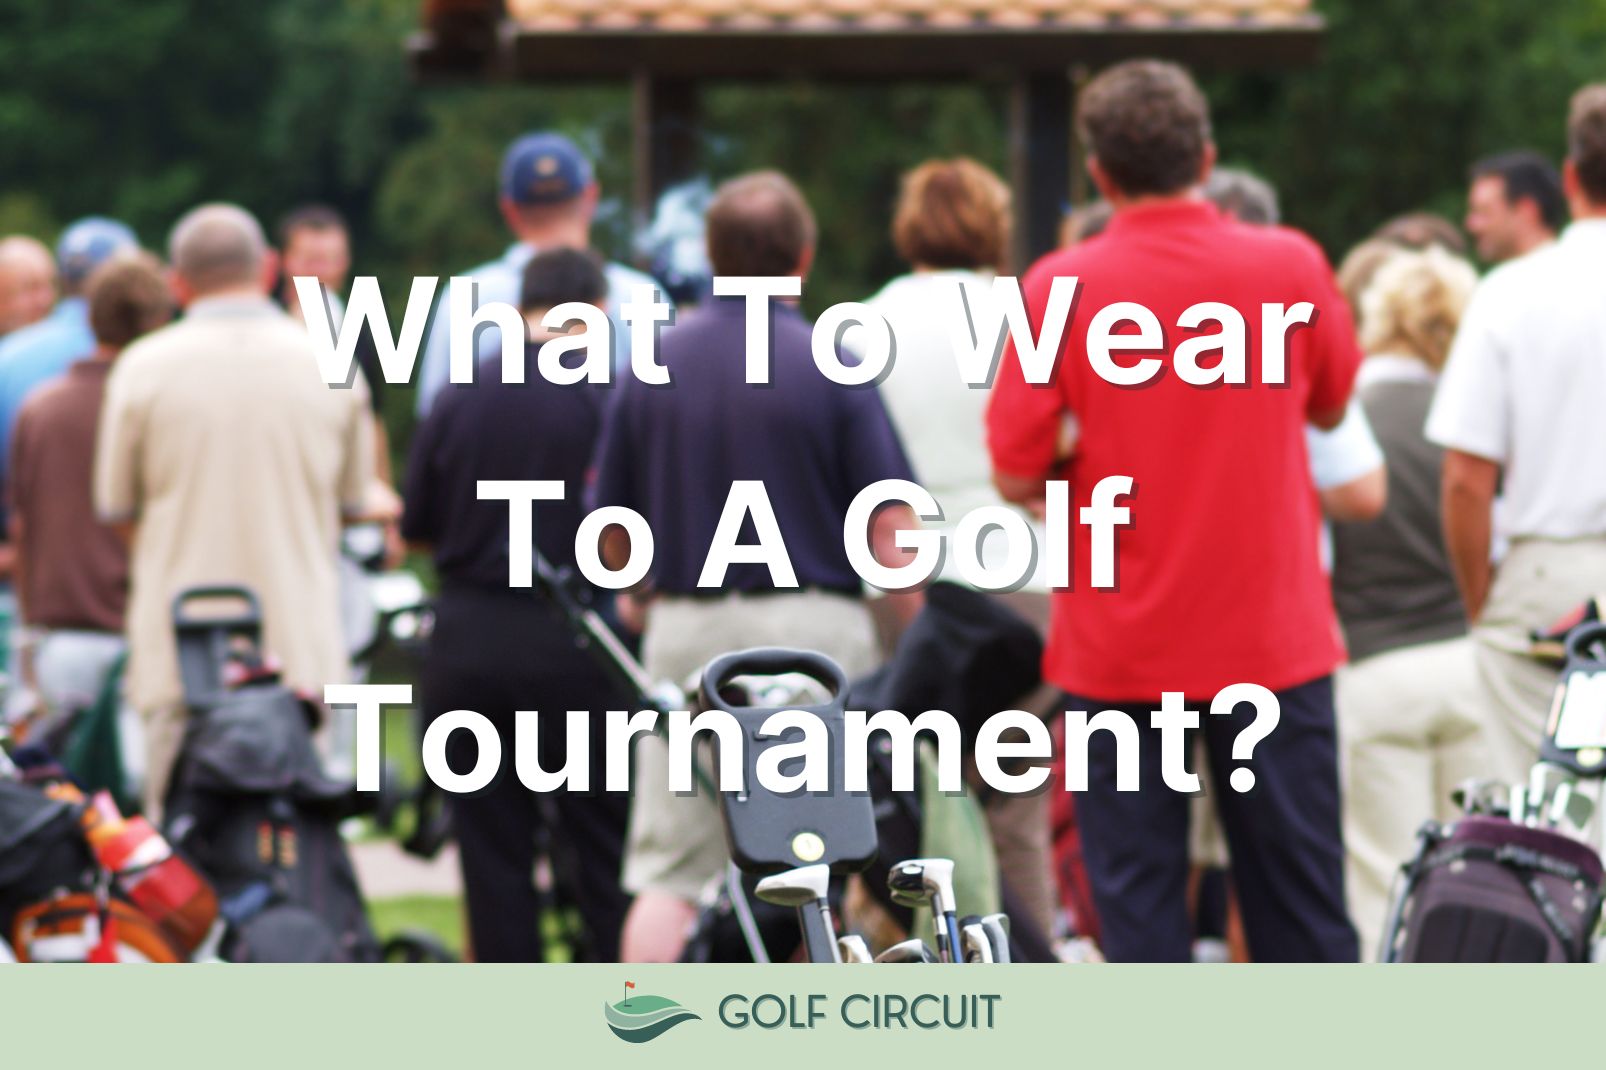 What to wear to a golf tournament